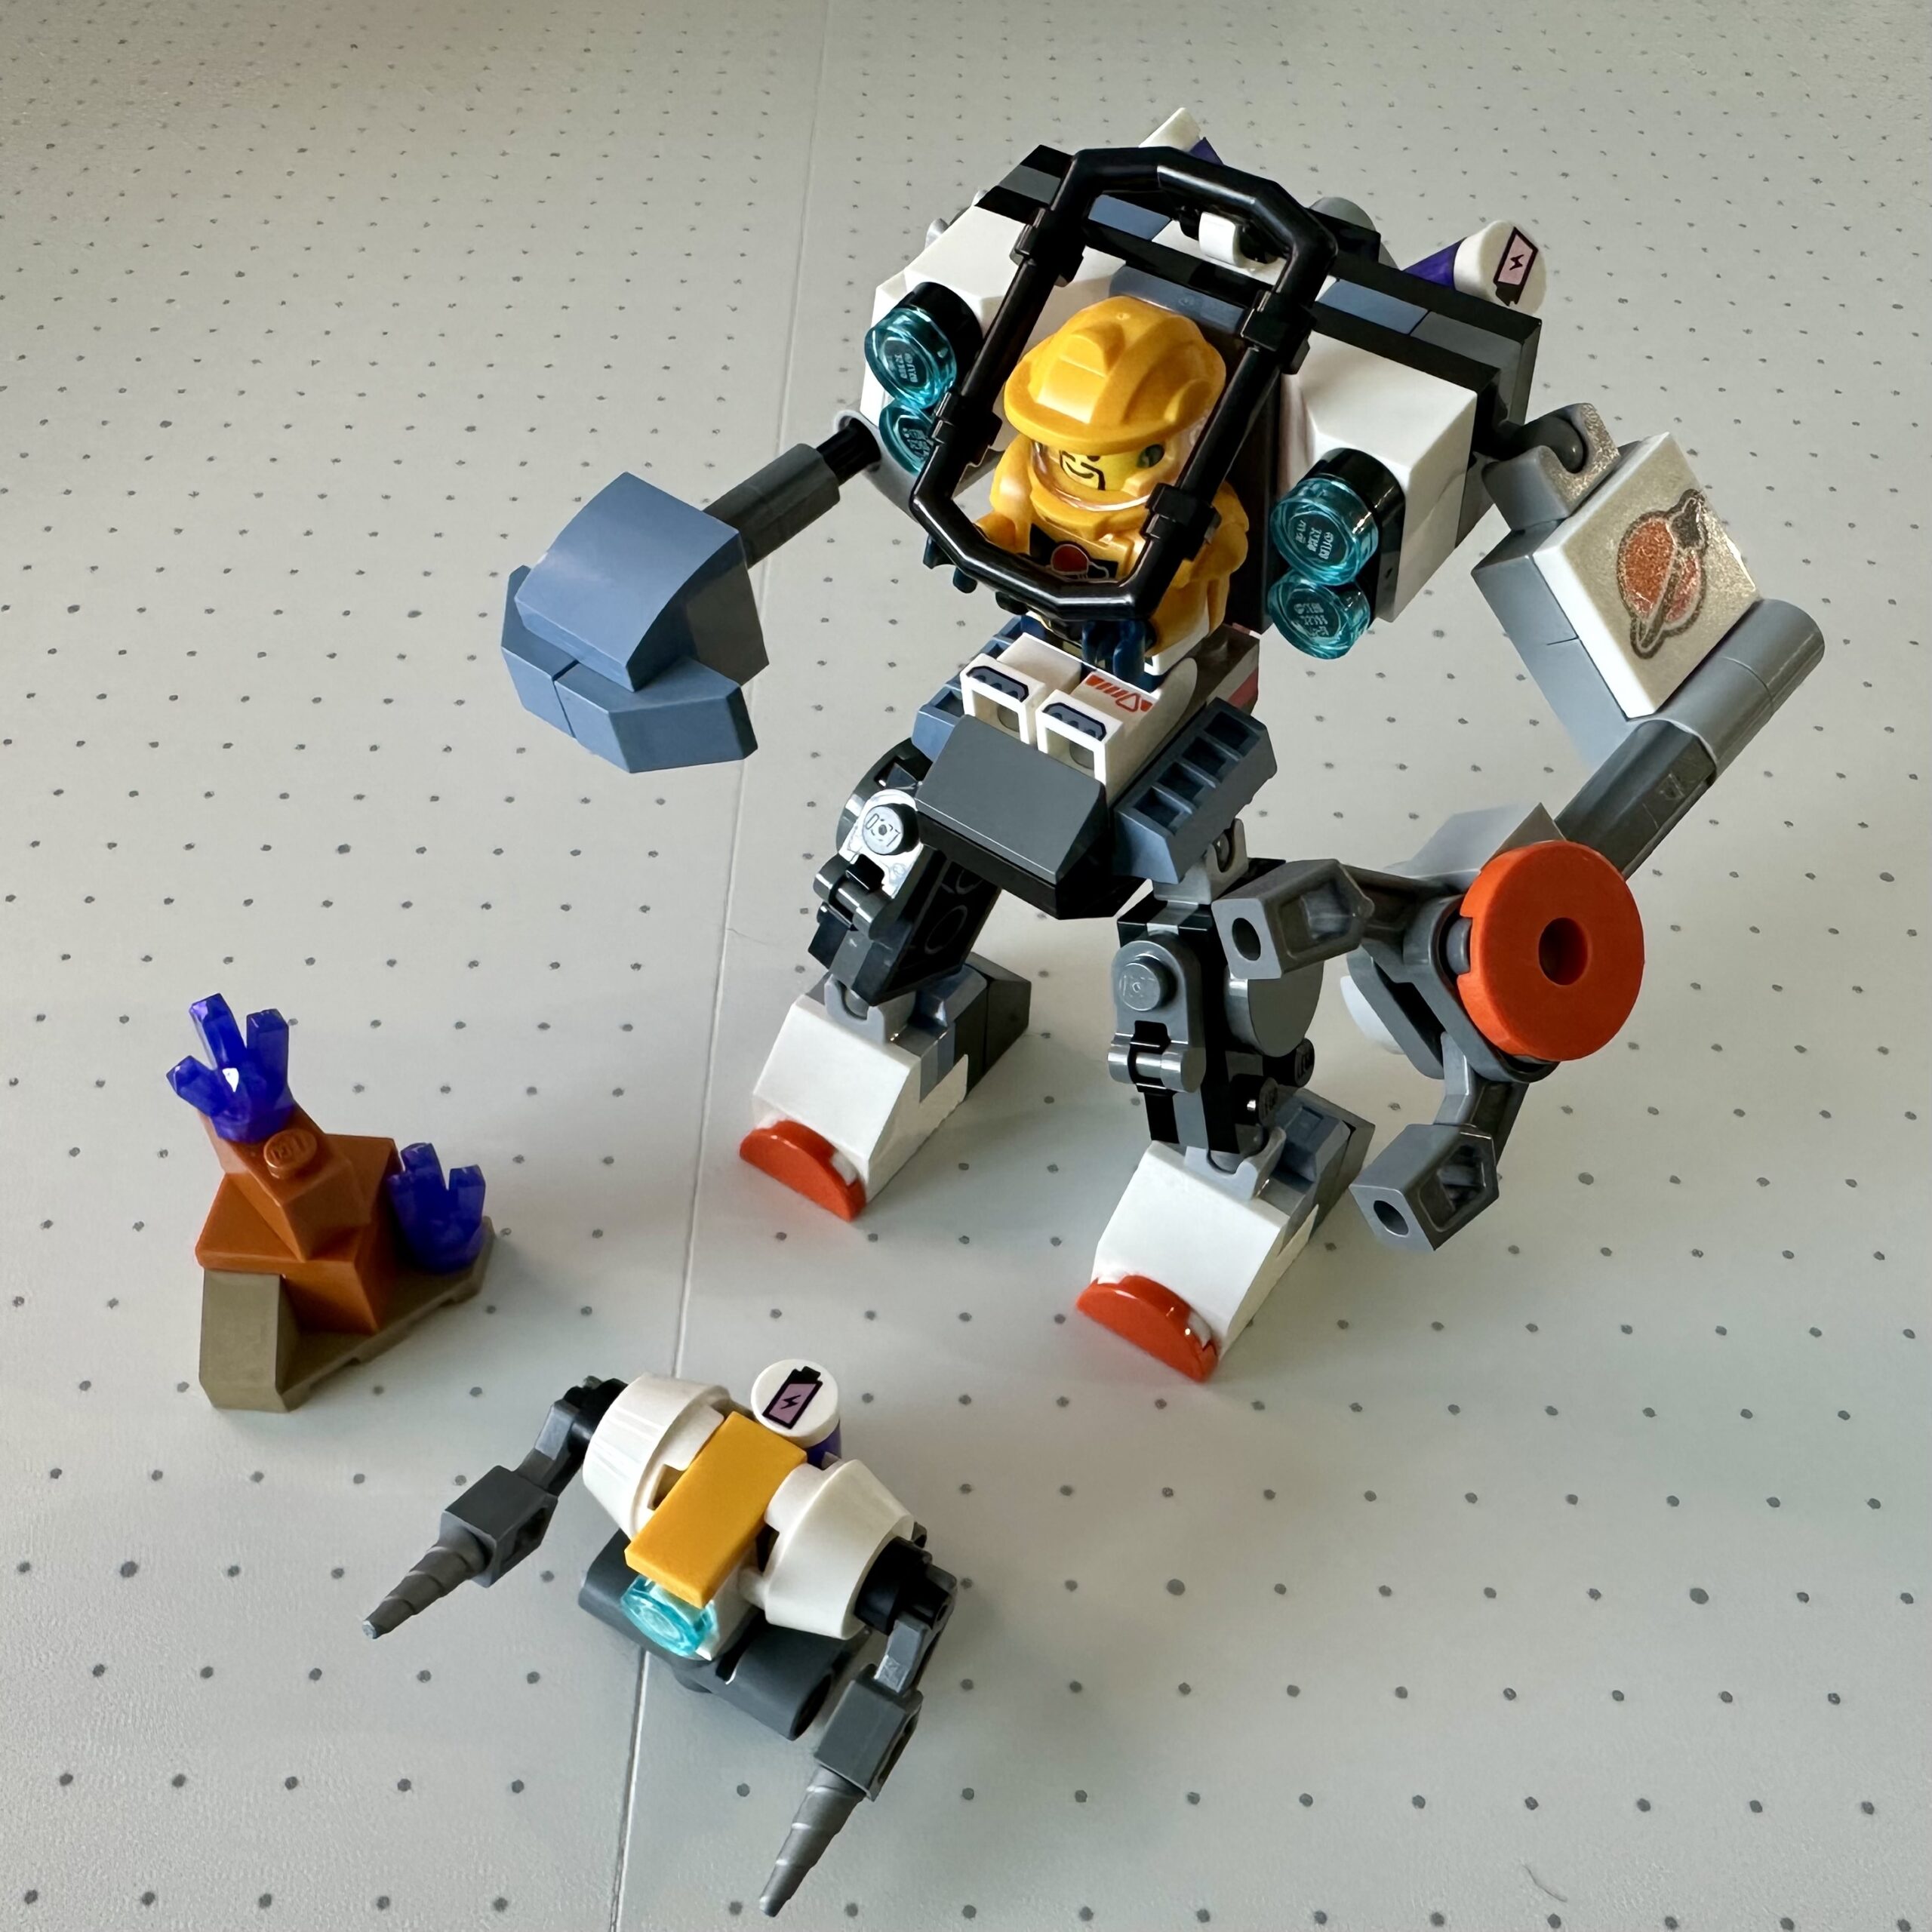 A gray and white LEGO mech in white and gray towers over a small robot with two drill arms and a small dark orange section of alien terrain with two purple crystals.